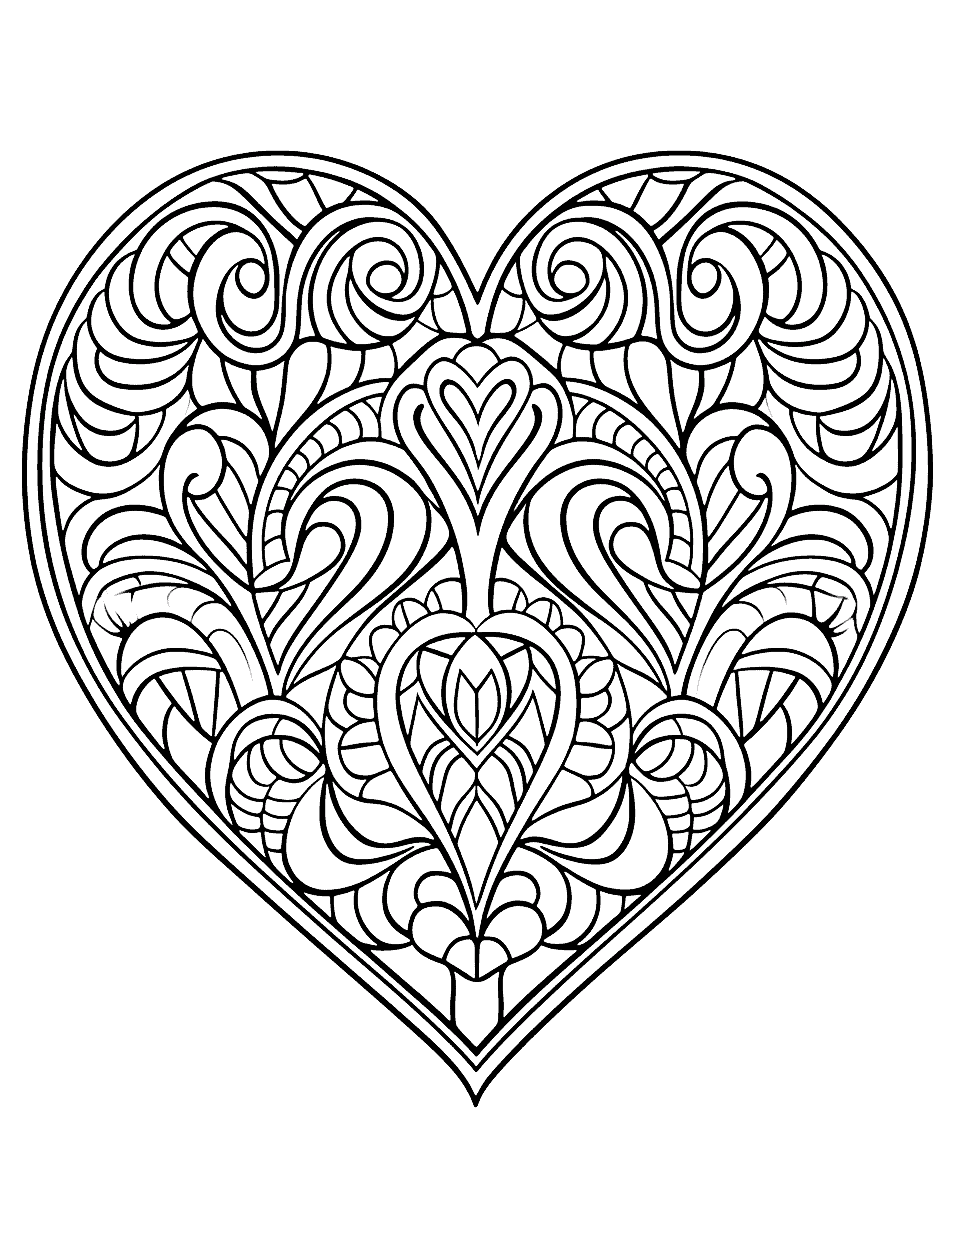 Fancy Heart Design Coloring Page - An ornate heart with fancy edges and decorative inner designs.